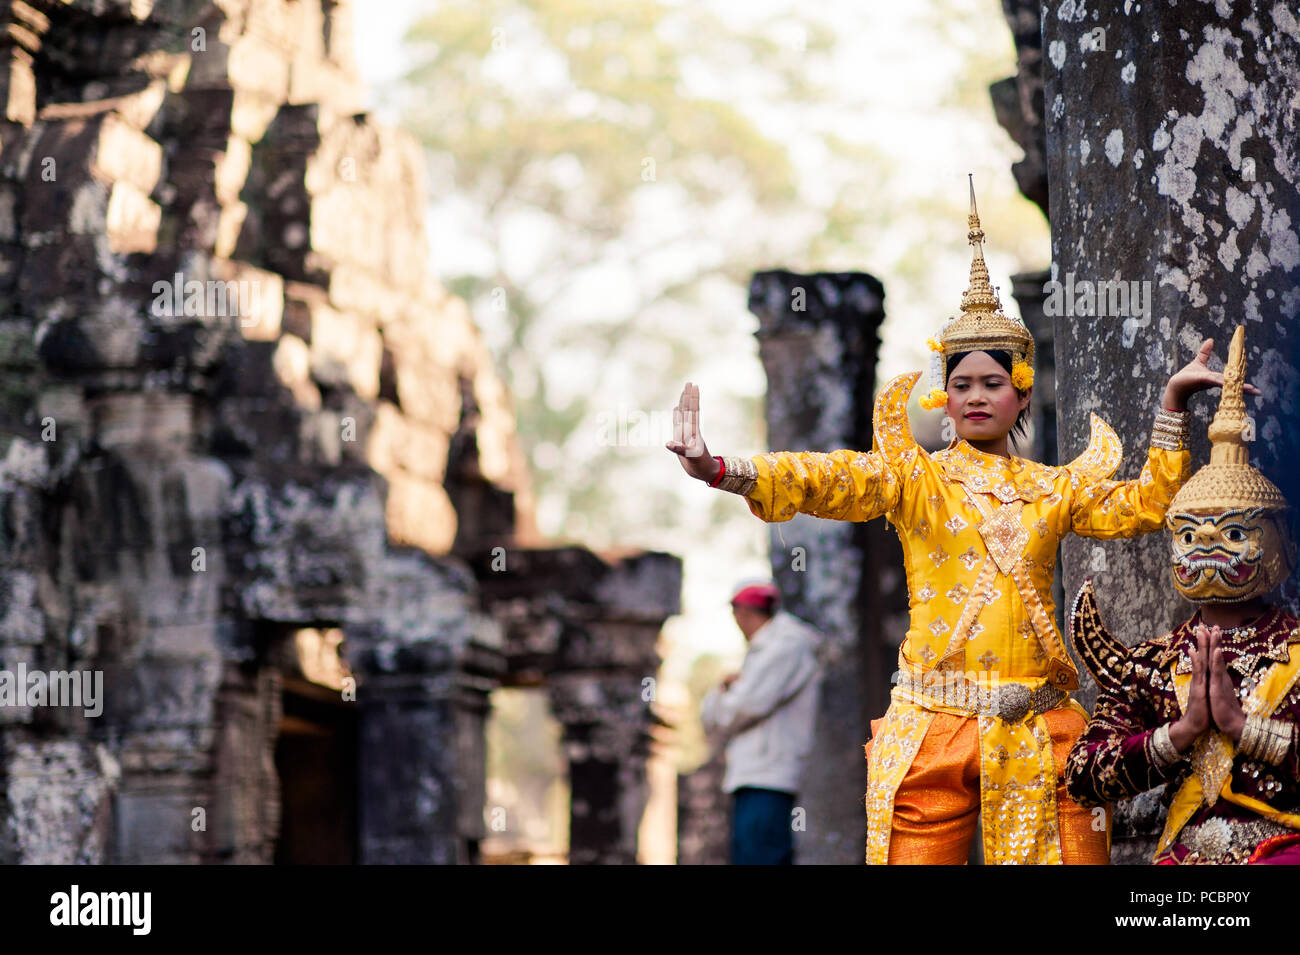 A traditional dance is performed in cultural costume for tourists at the Bayon Temple in the Angkor Wat Park, Siem Reap, Cambodia, South East Asia Stock Photo